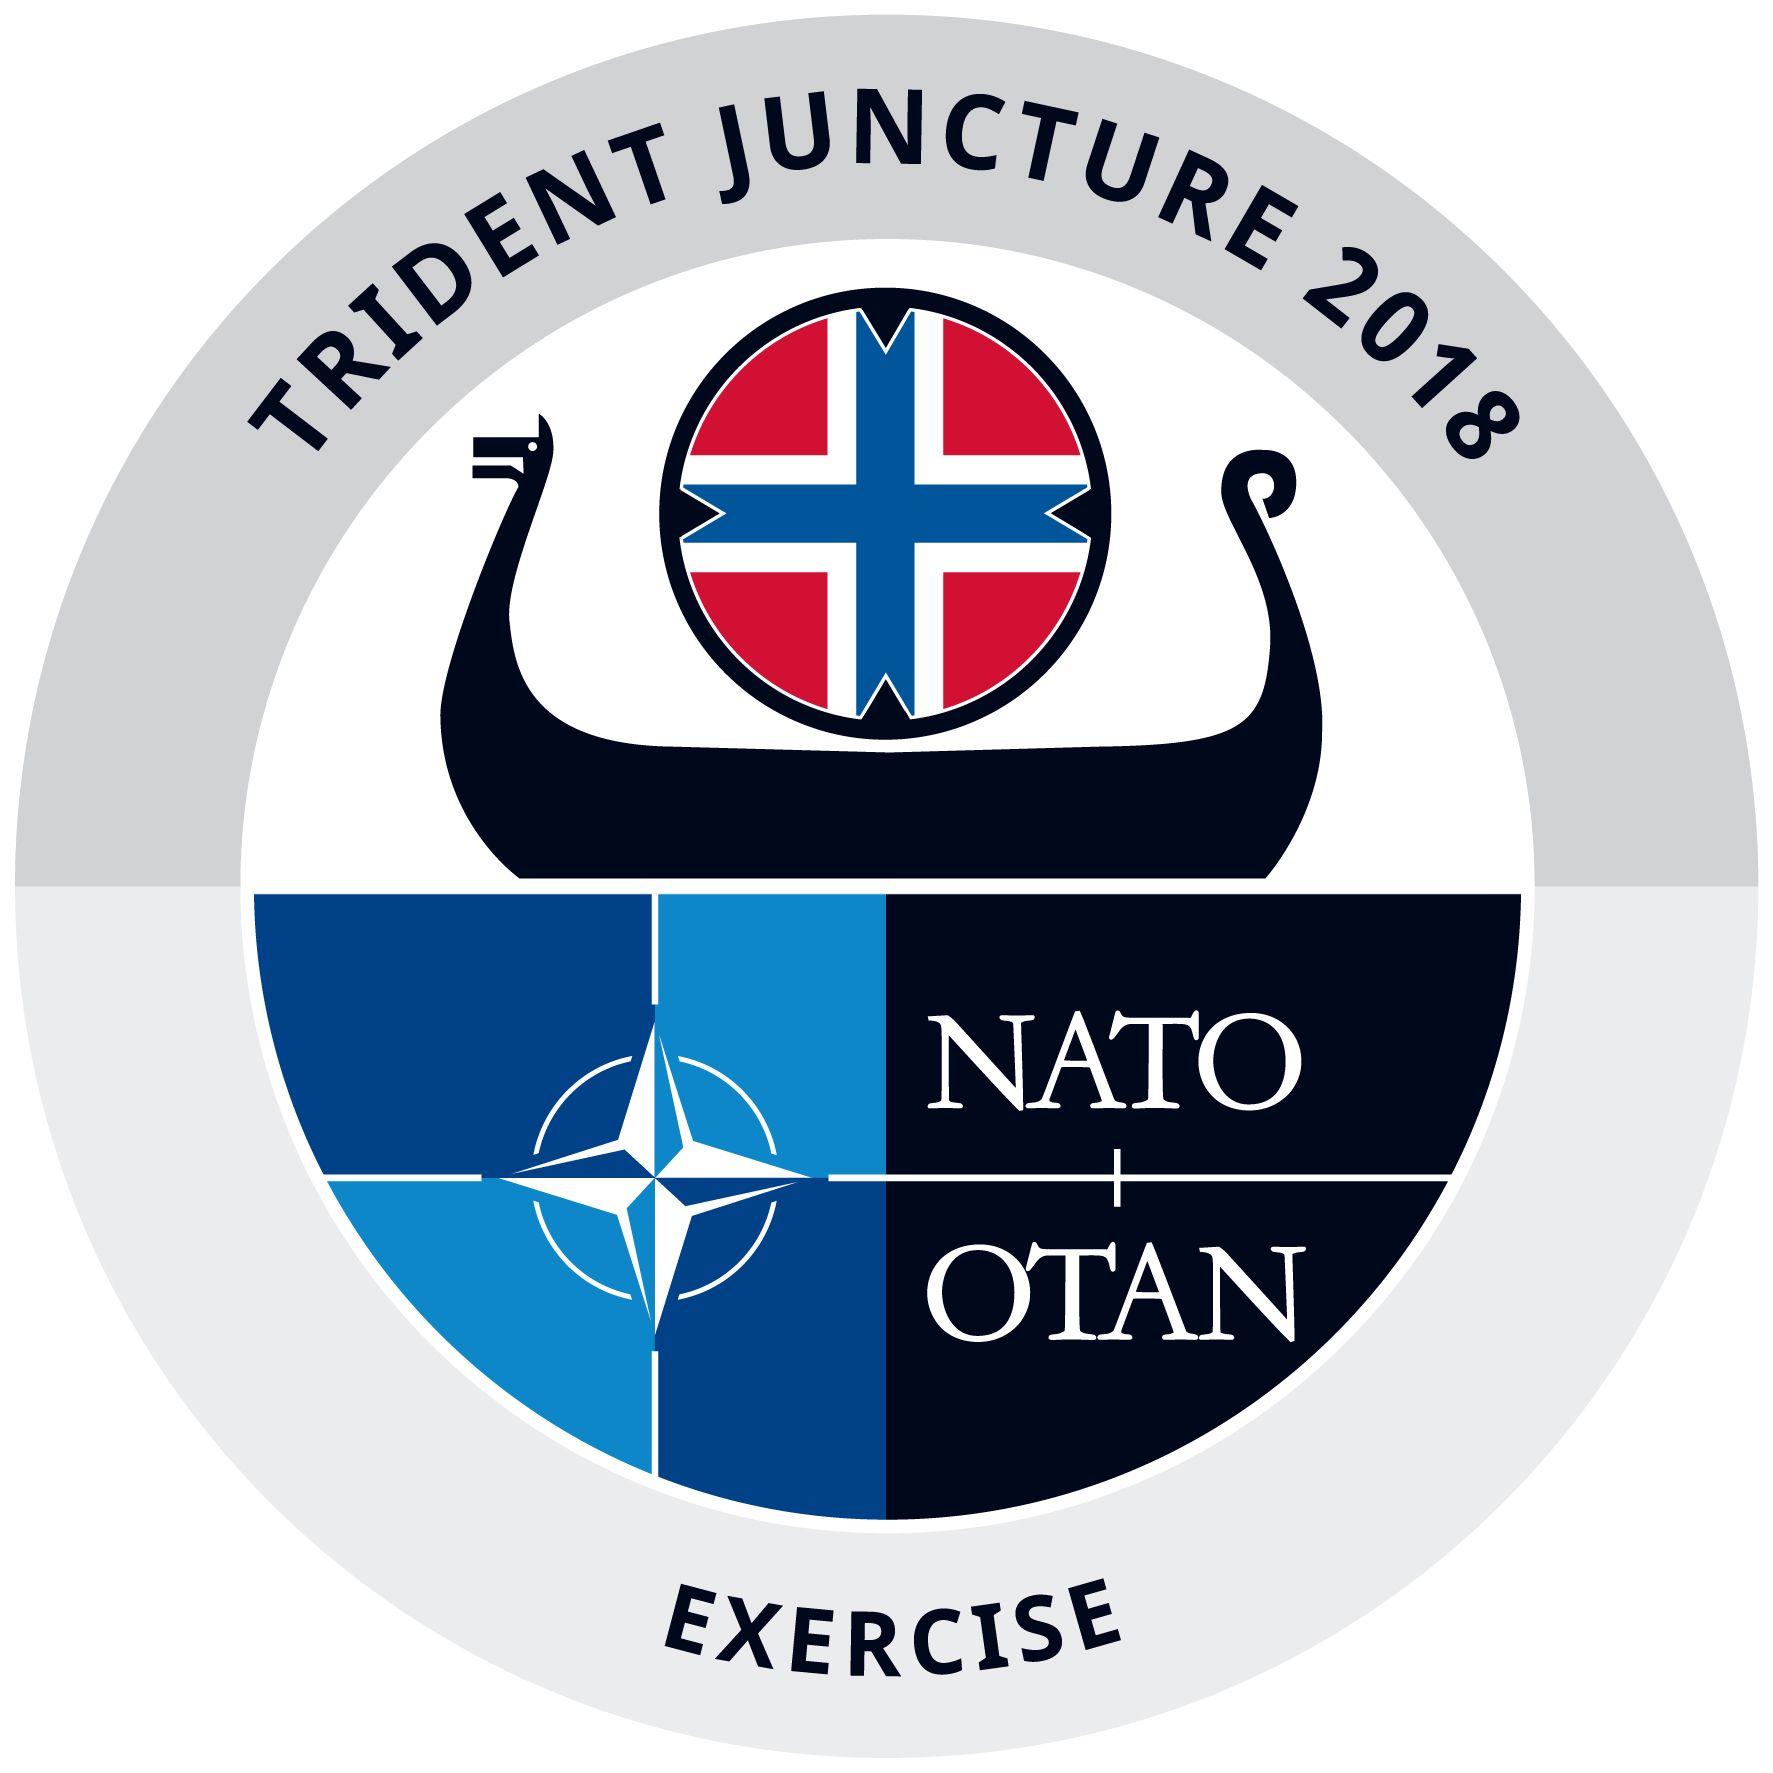 Exercise Logo - Exercise Trident Juncture 18